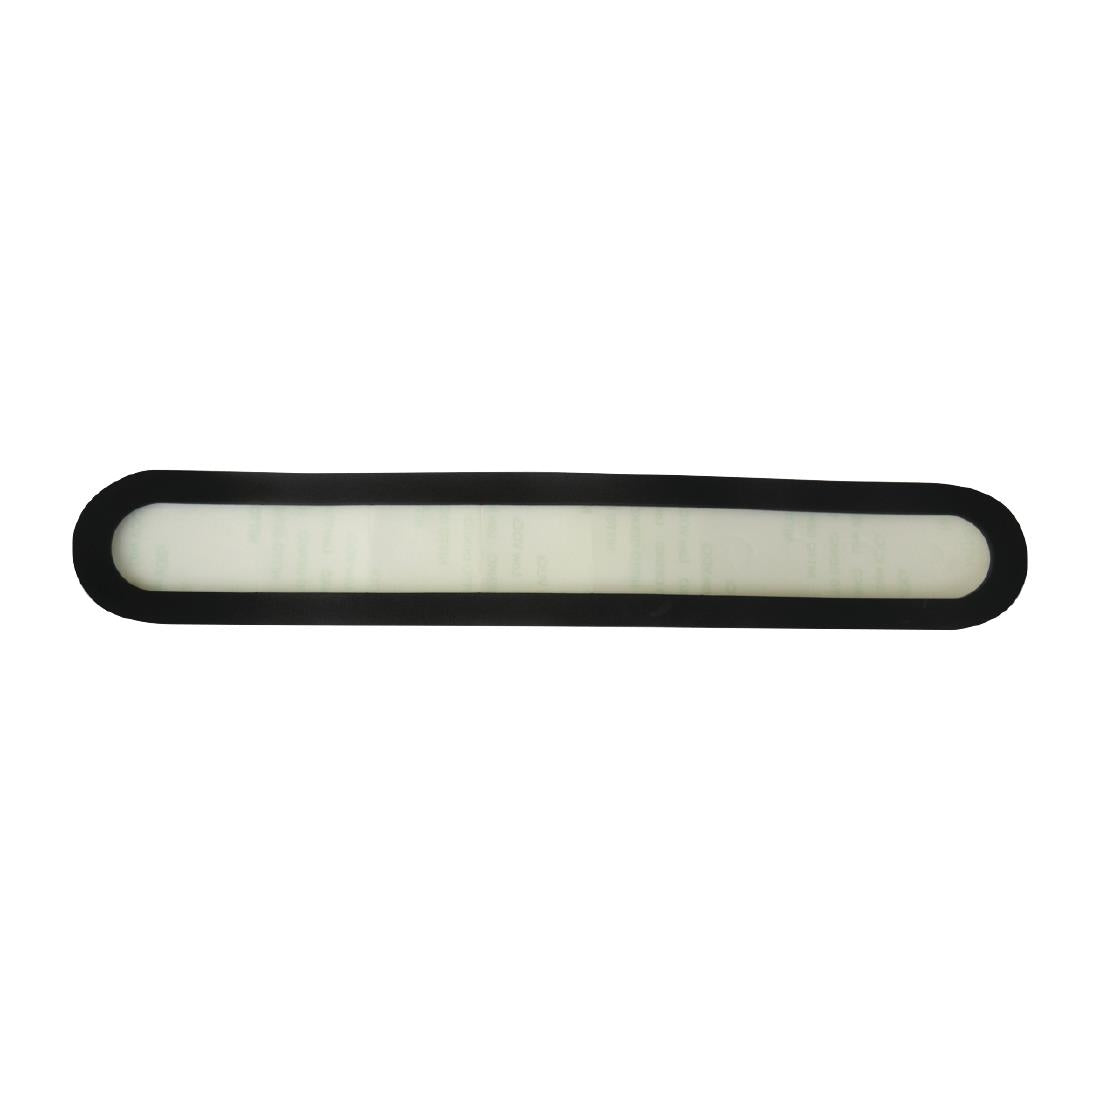 Buffalo Upper Gasket for Vacuum Packing Machine JD Catering Equipment Solutions Ltd